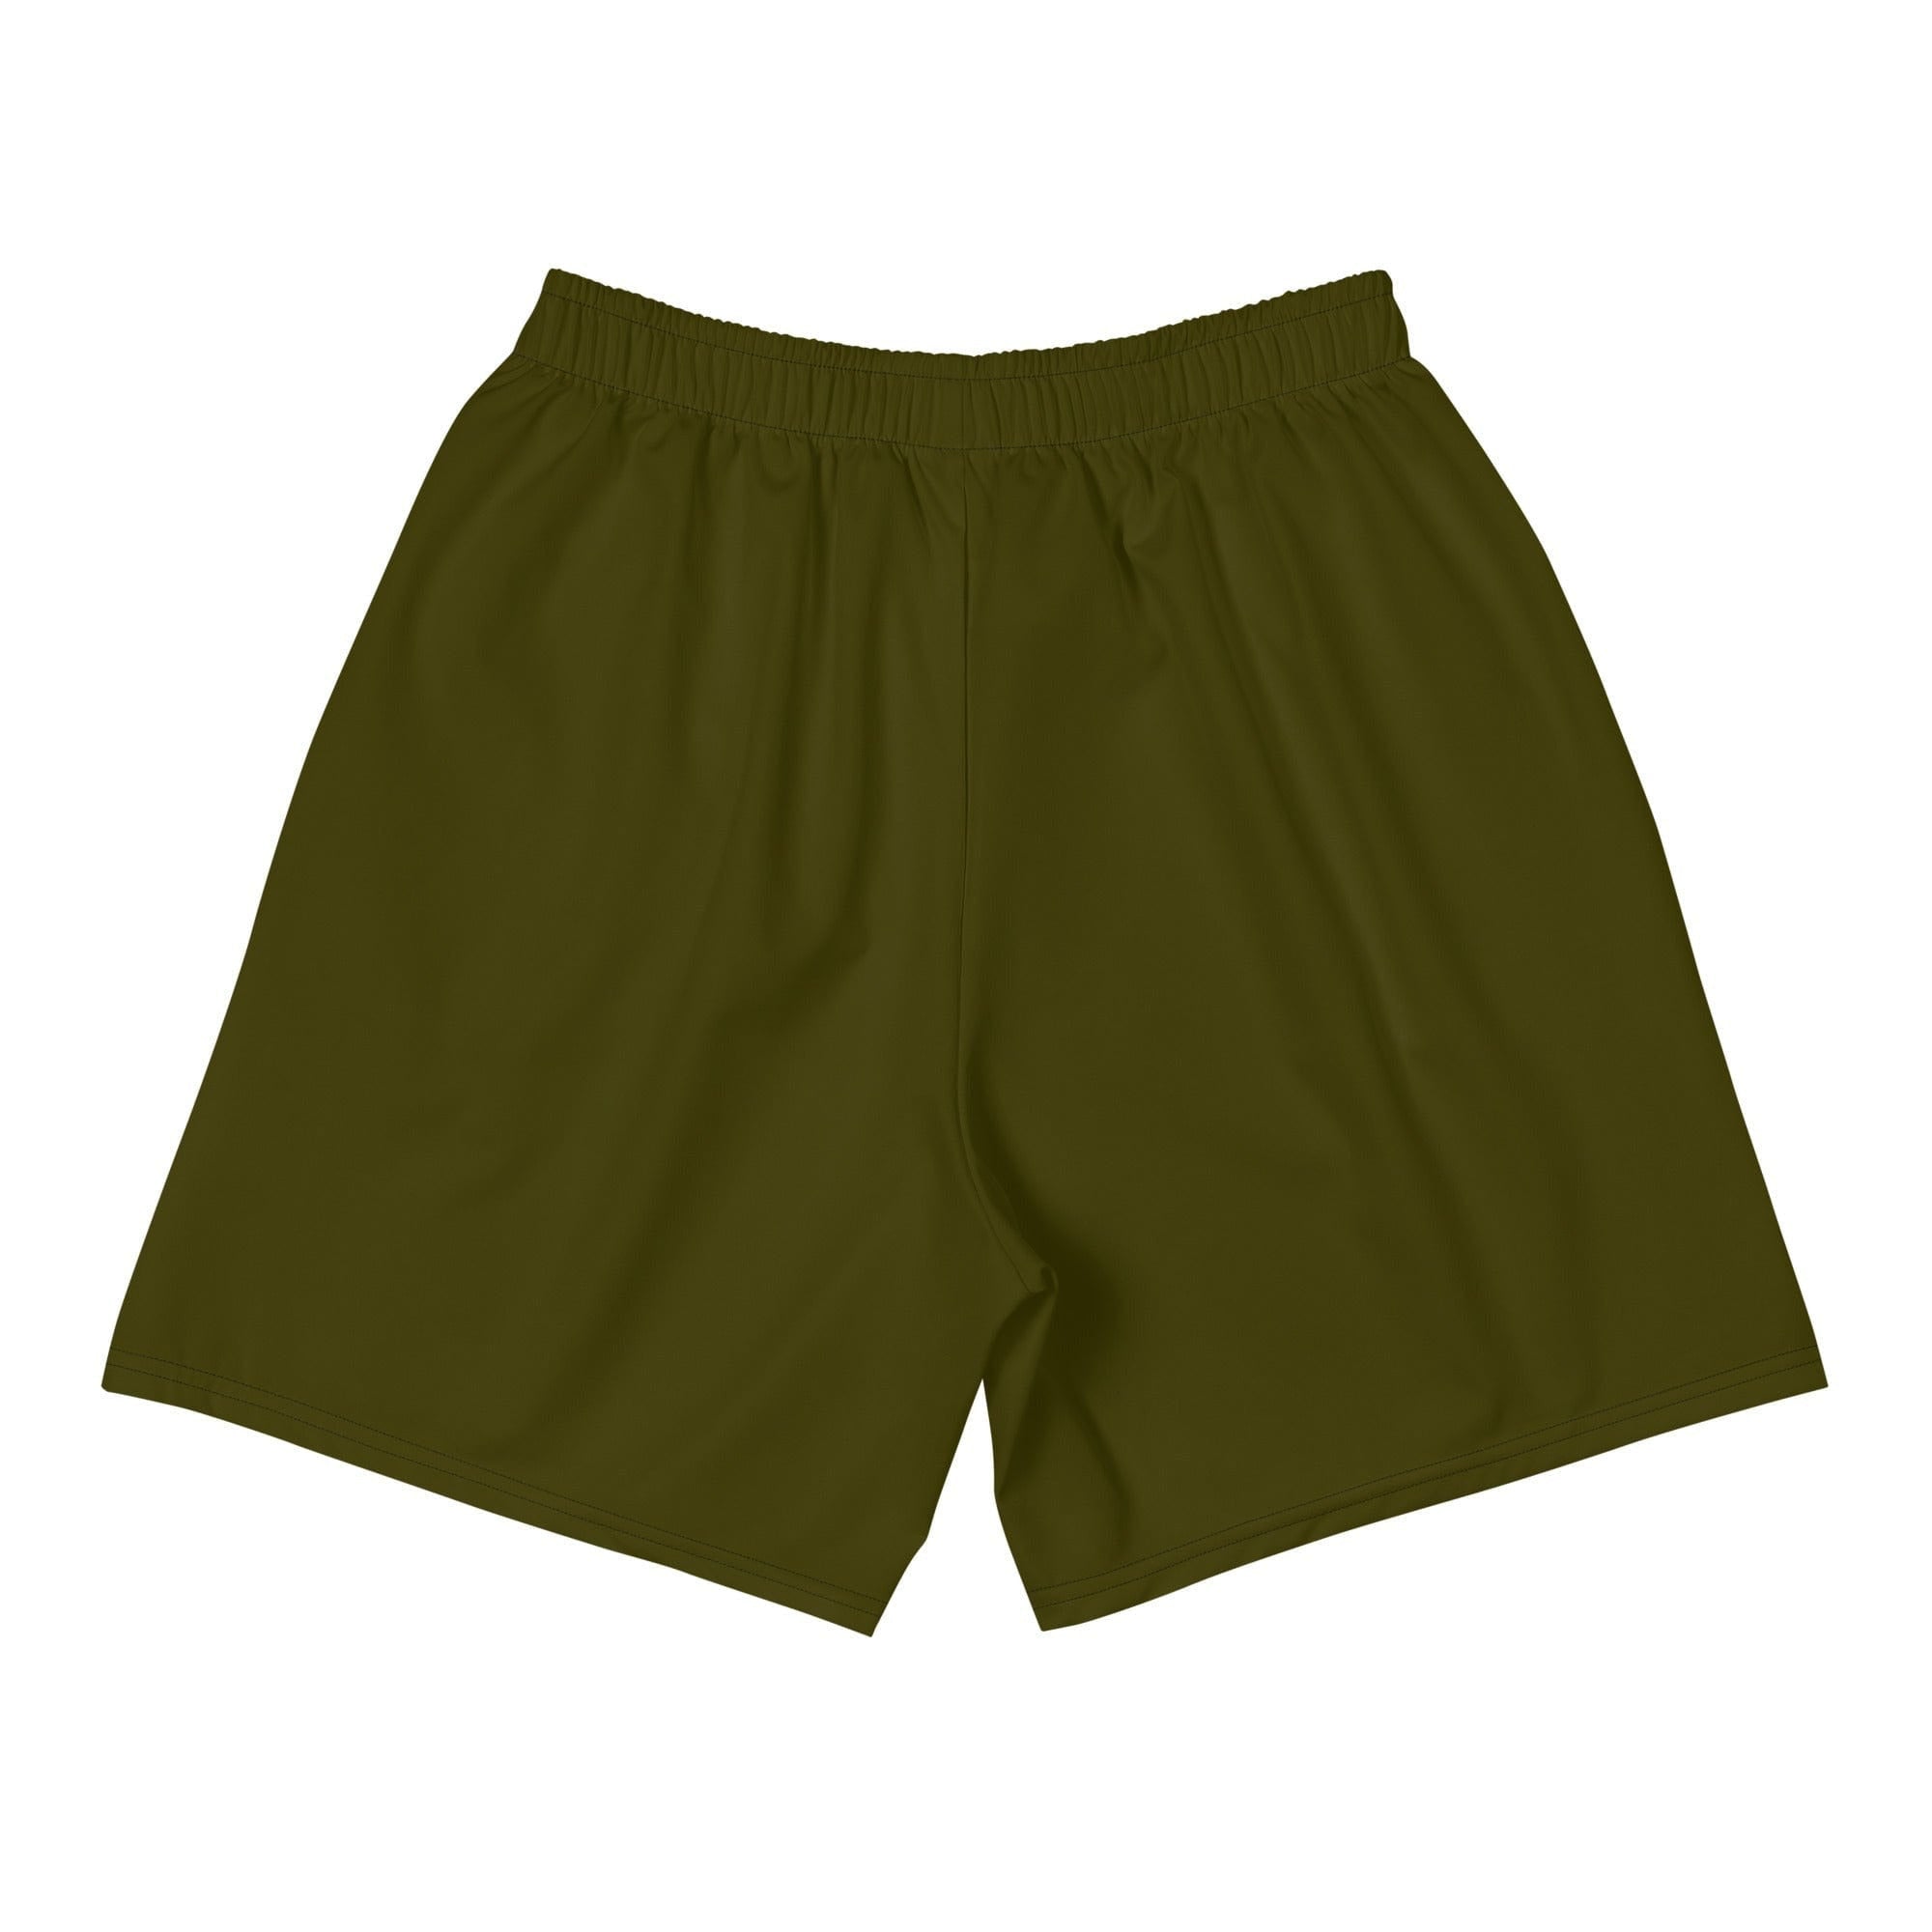 SORE TODAY SHORTS (MILITARY GREEN)